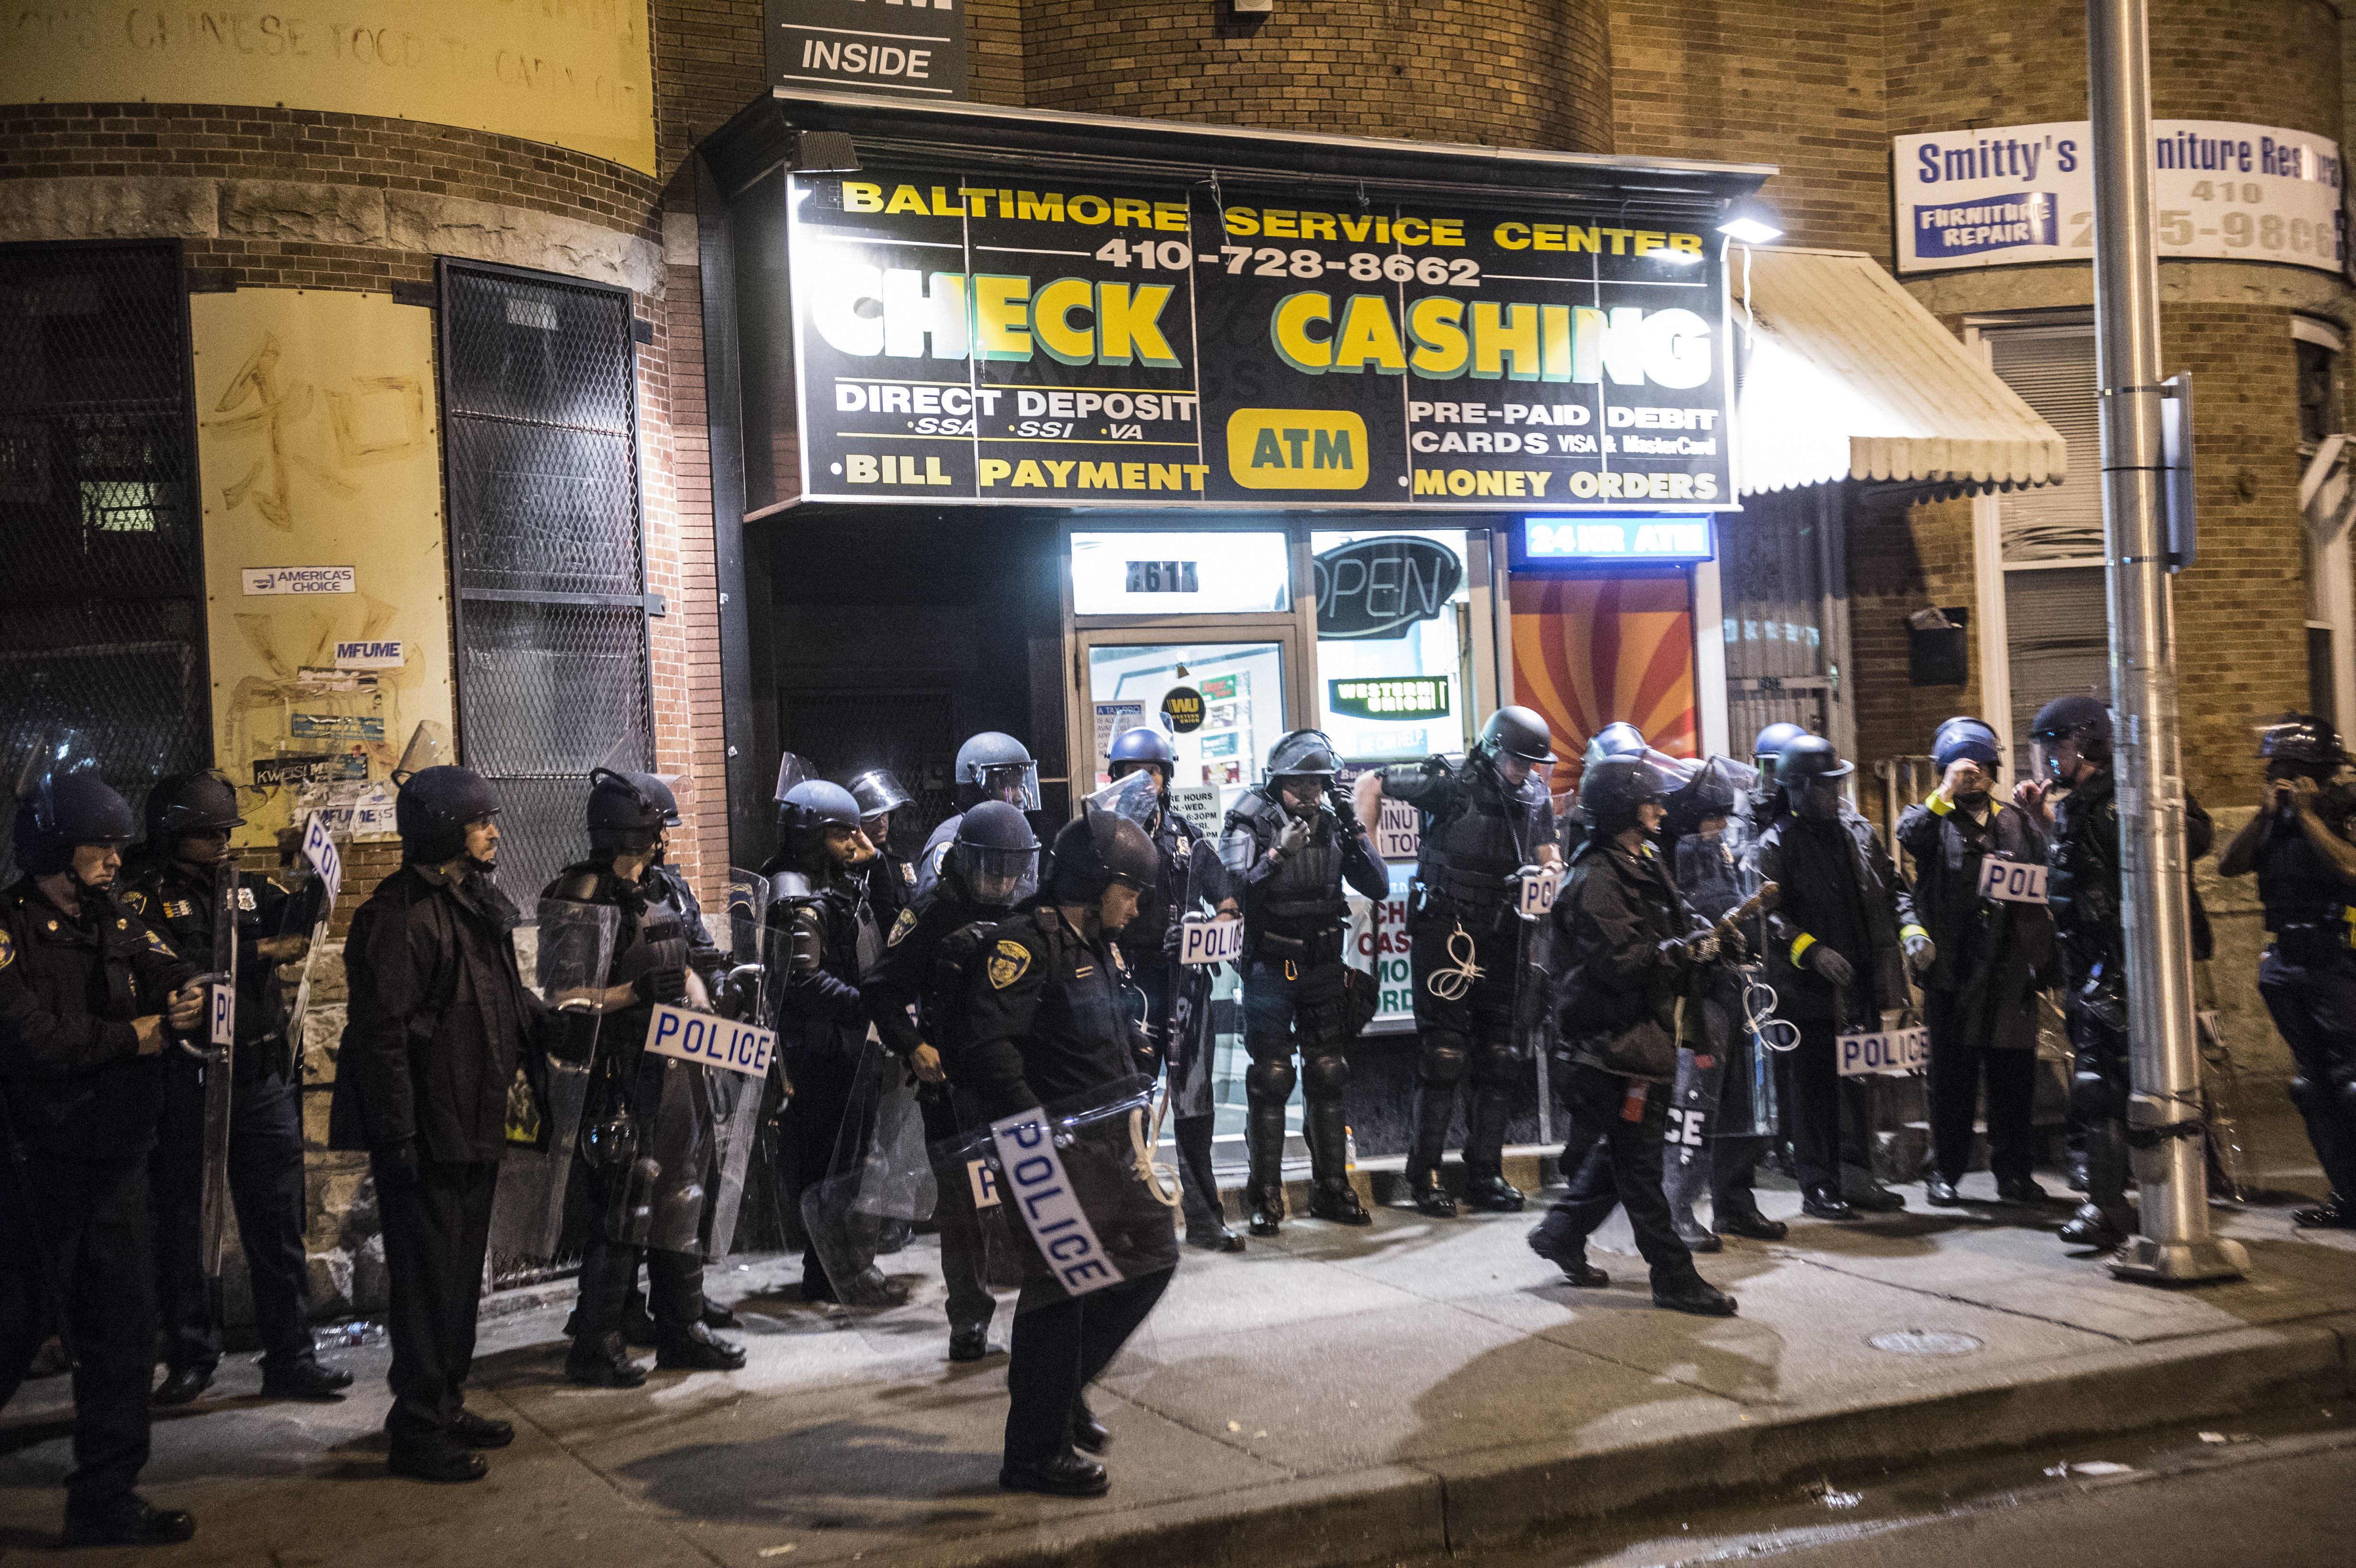 Baltimore police took to the streets at night to enforce curfew since rioting began after the funeral of Freddie Gray who died while in police custody. (Photo: Robert Stolarik/Polaris/Newscom)